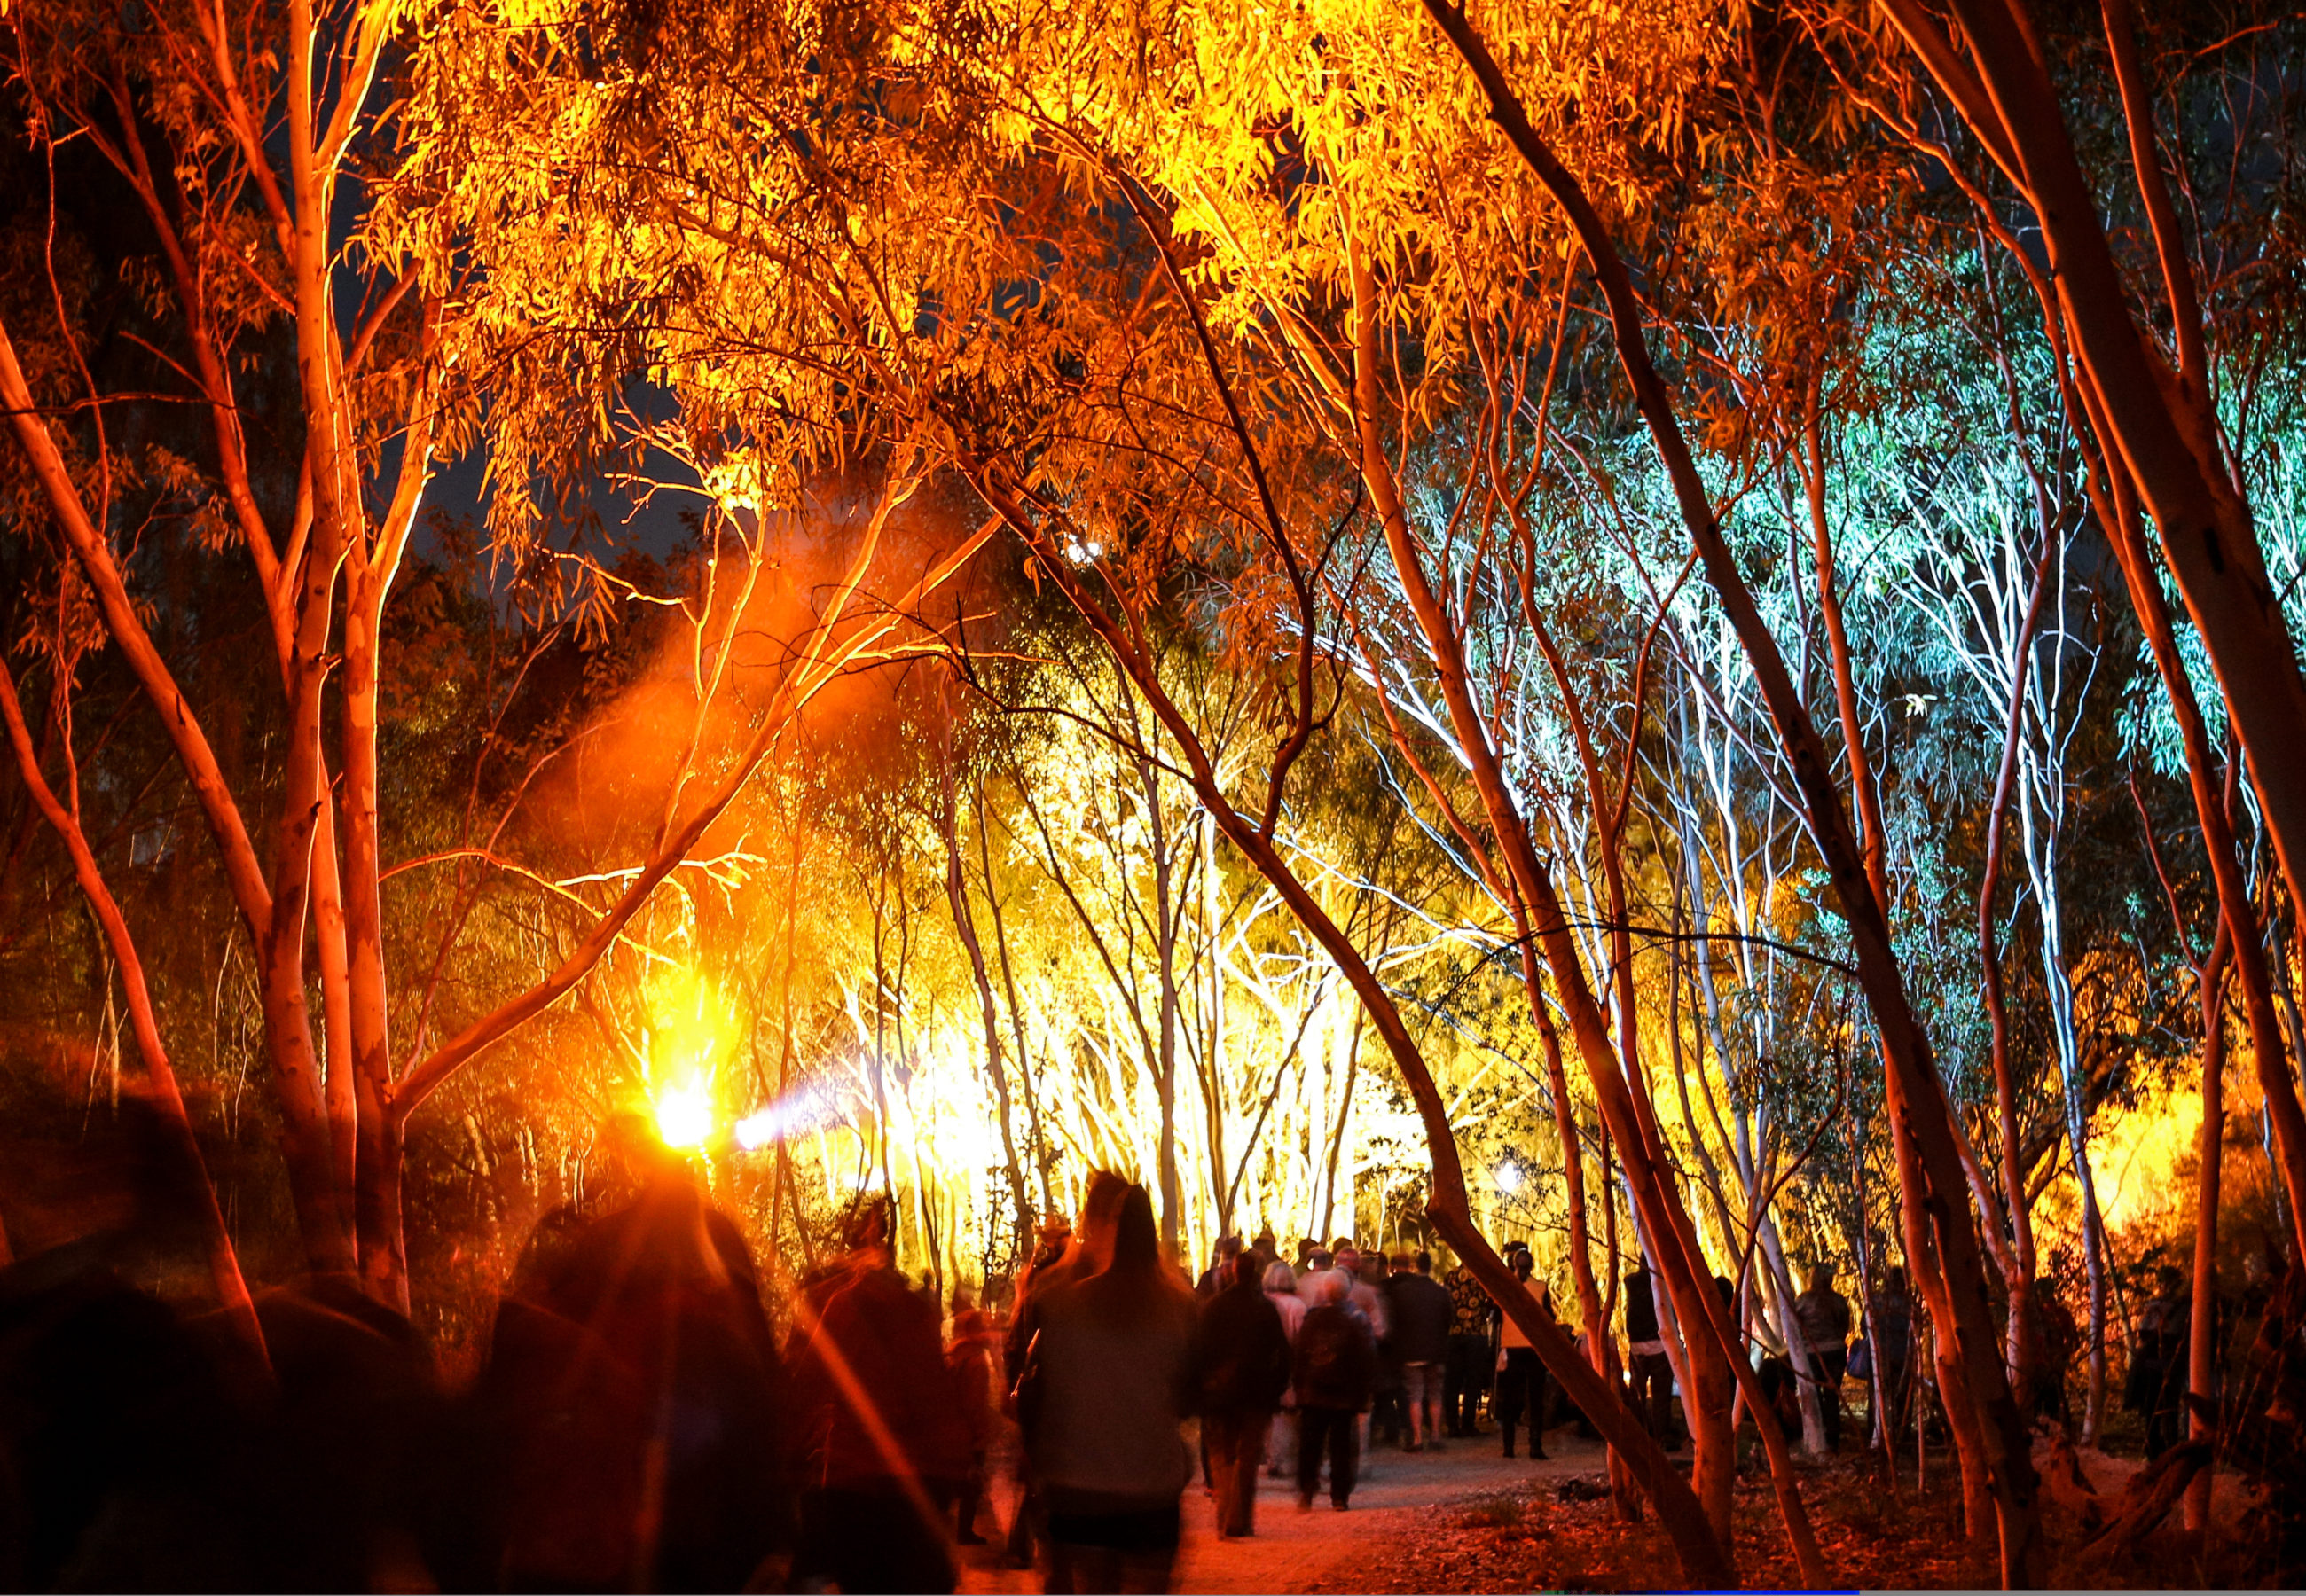 A crowd of people congregate underneath a canopy of eucalyptus trees at twilight. In the distance, a light shines through the trees.